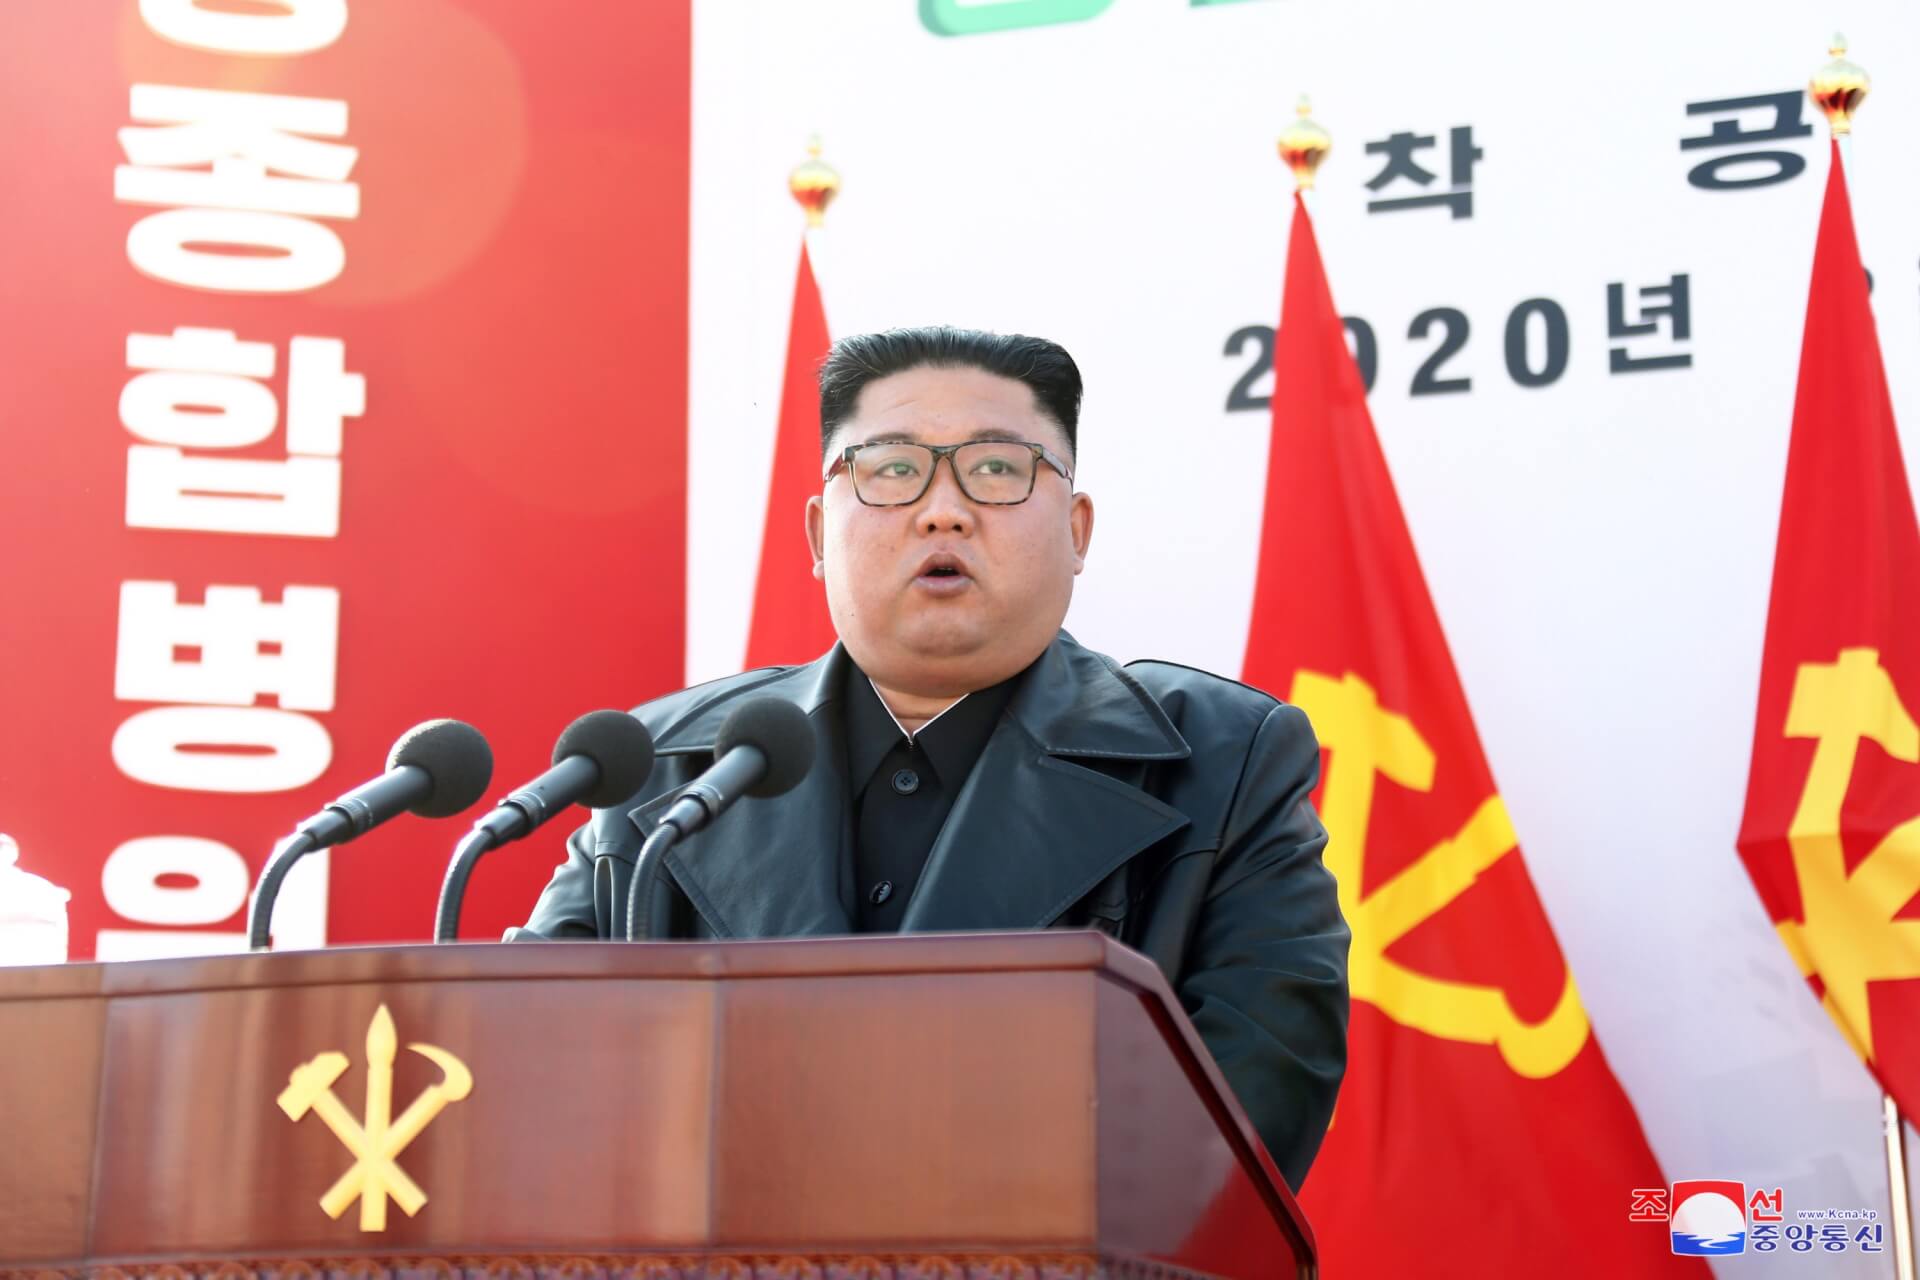 Kim Jong-un Vows to Continue Strengthening North Korea’s Nuclear Arsenal at “Fastest Pace”